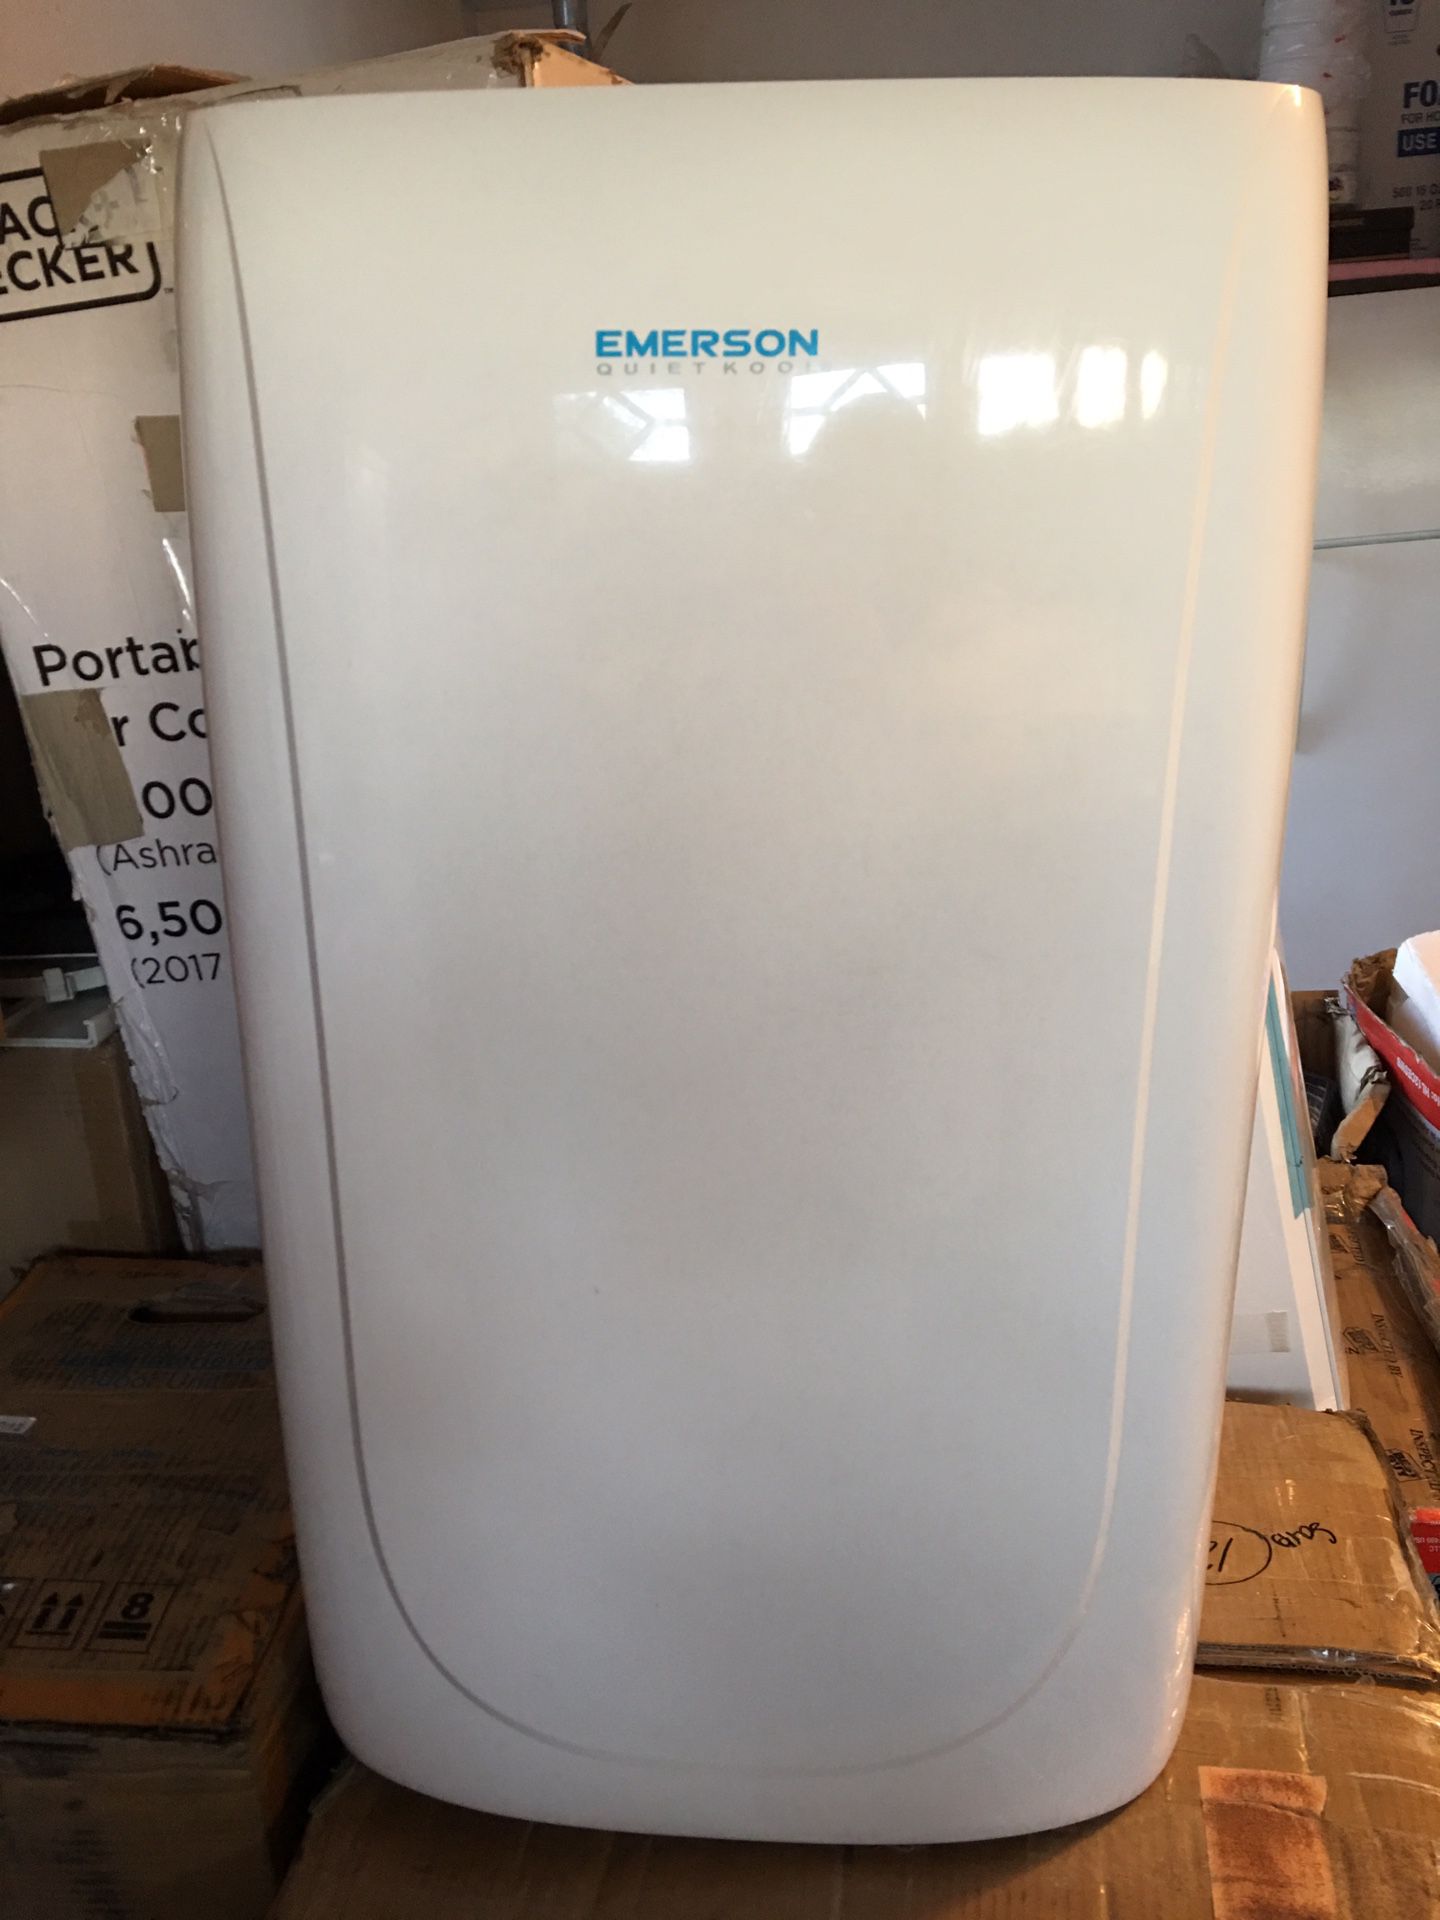 Emerson quiet cool portable air conditioners